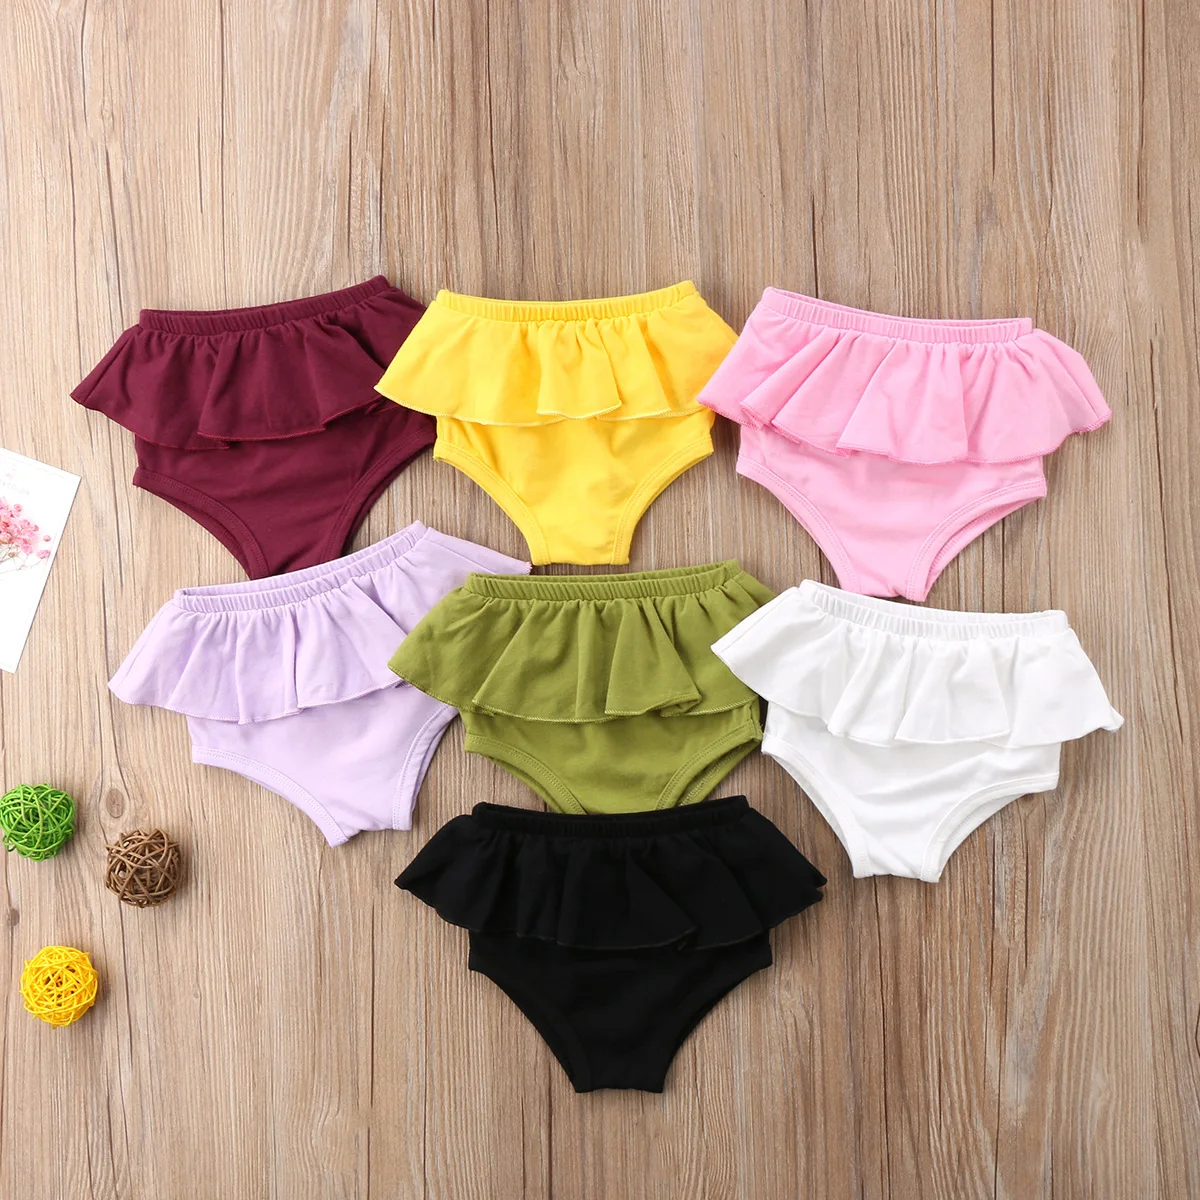 Lovely Newborn Kid Baby Girl Panties PP Shorts Ruffle Tutu Shorts Summer New Solid Bloomer Diaper Cover Briefs 7 Colors